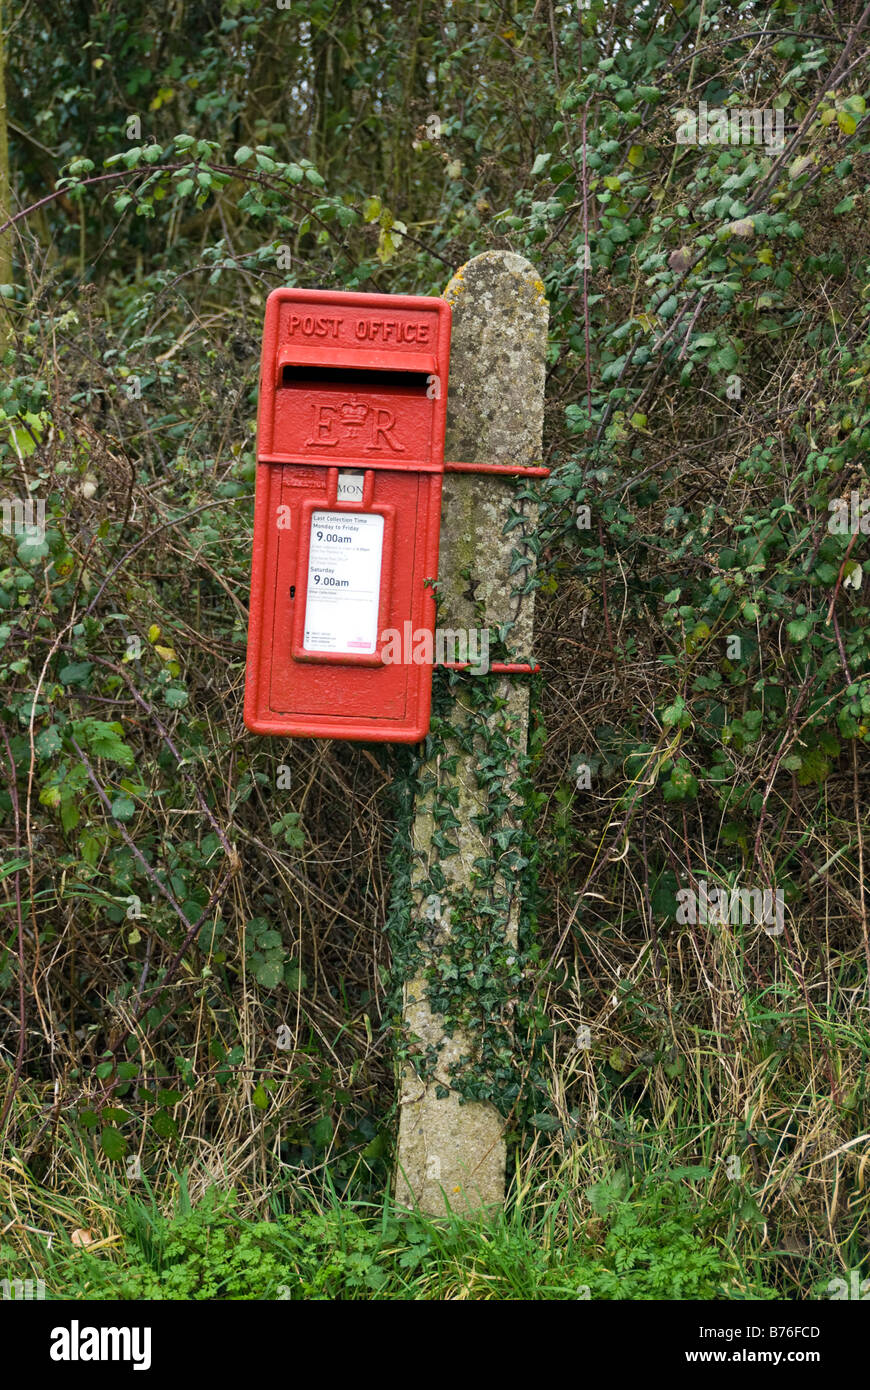 Rural Royal Mail letterbox in the countryside with undergrowth UK Stock Photo